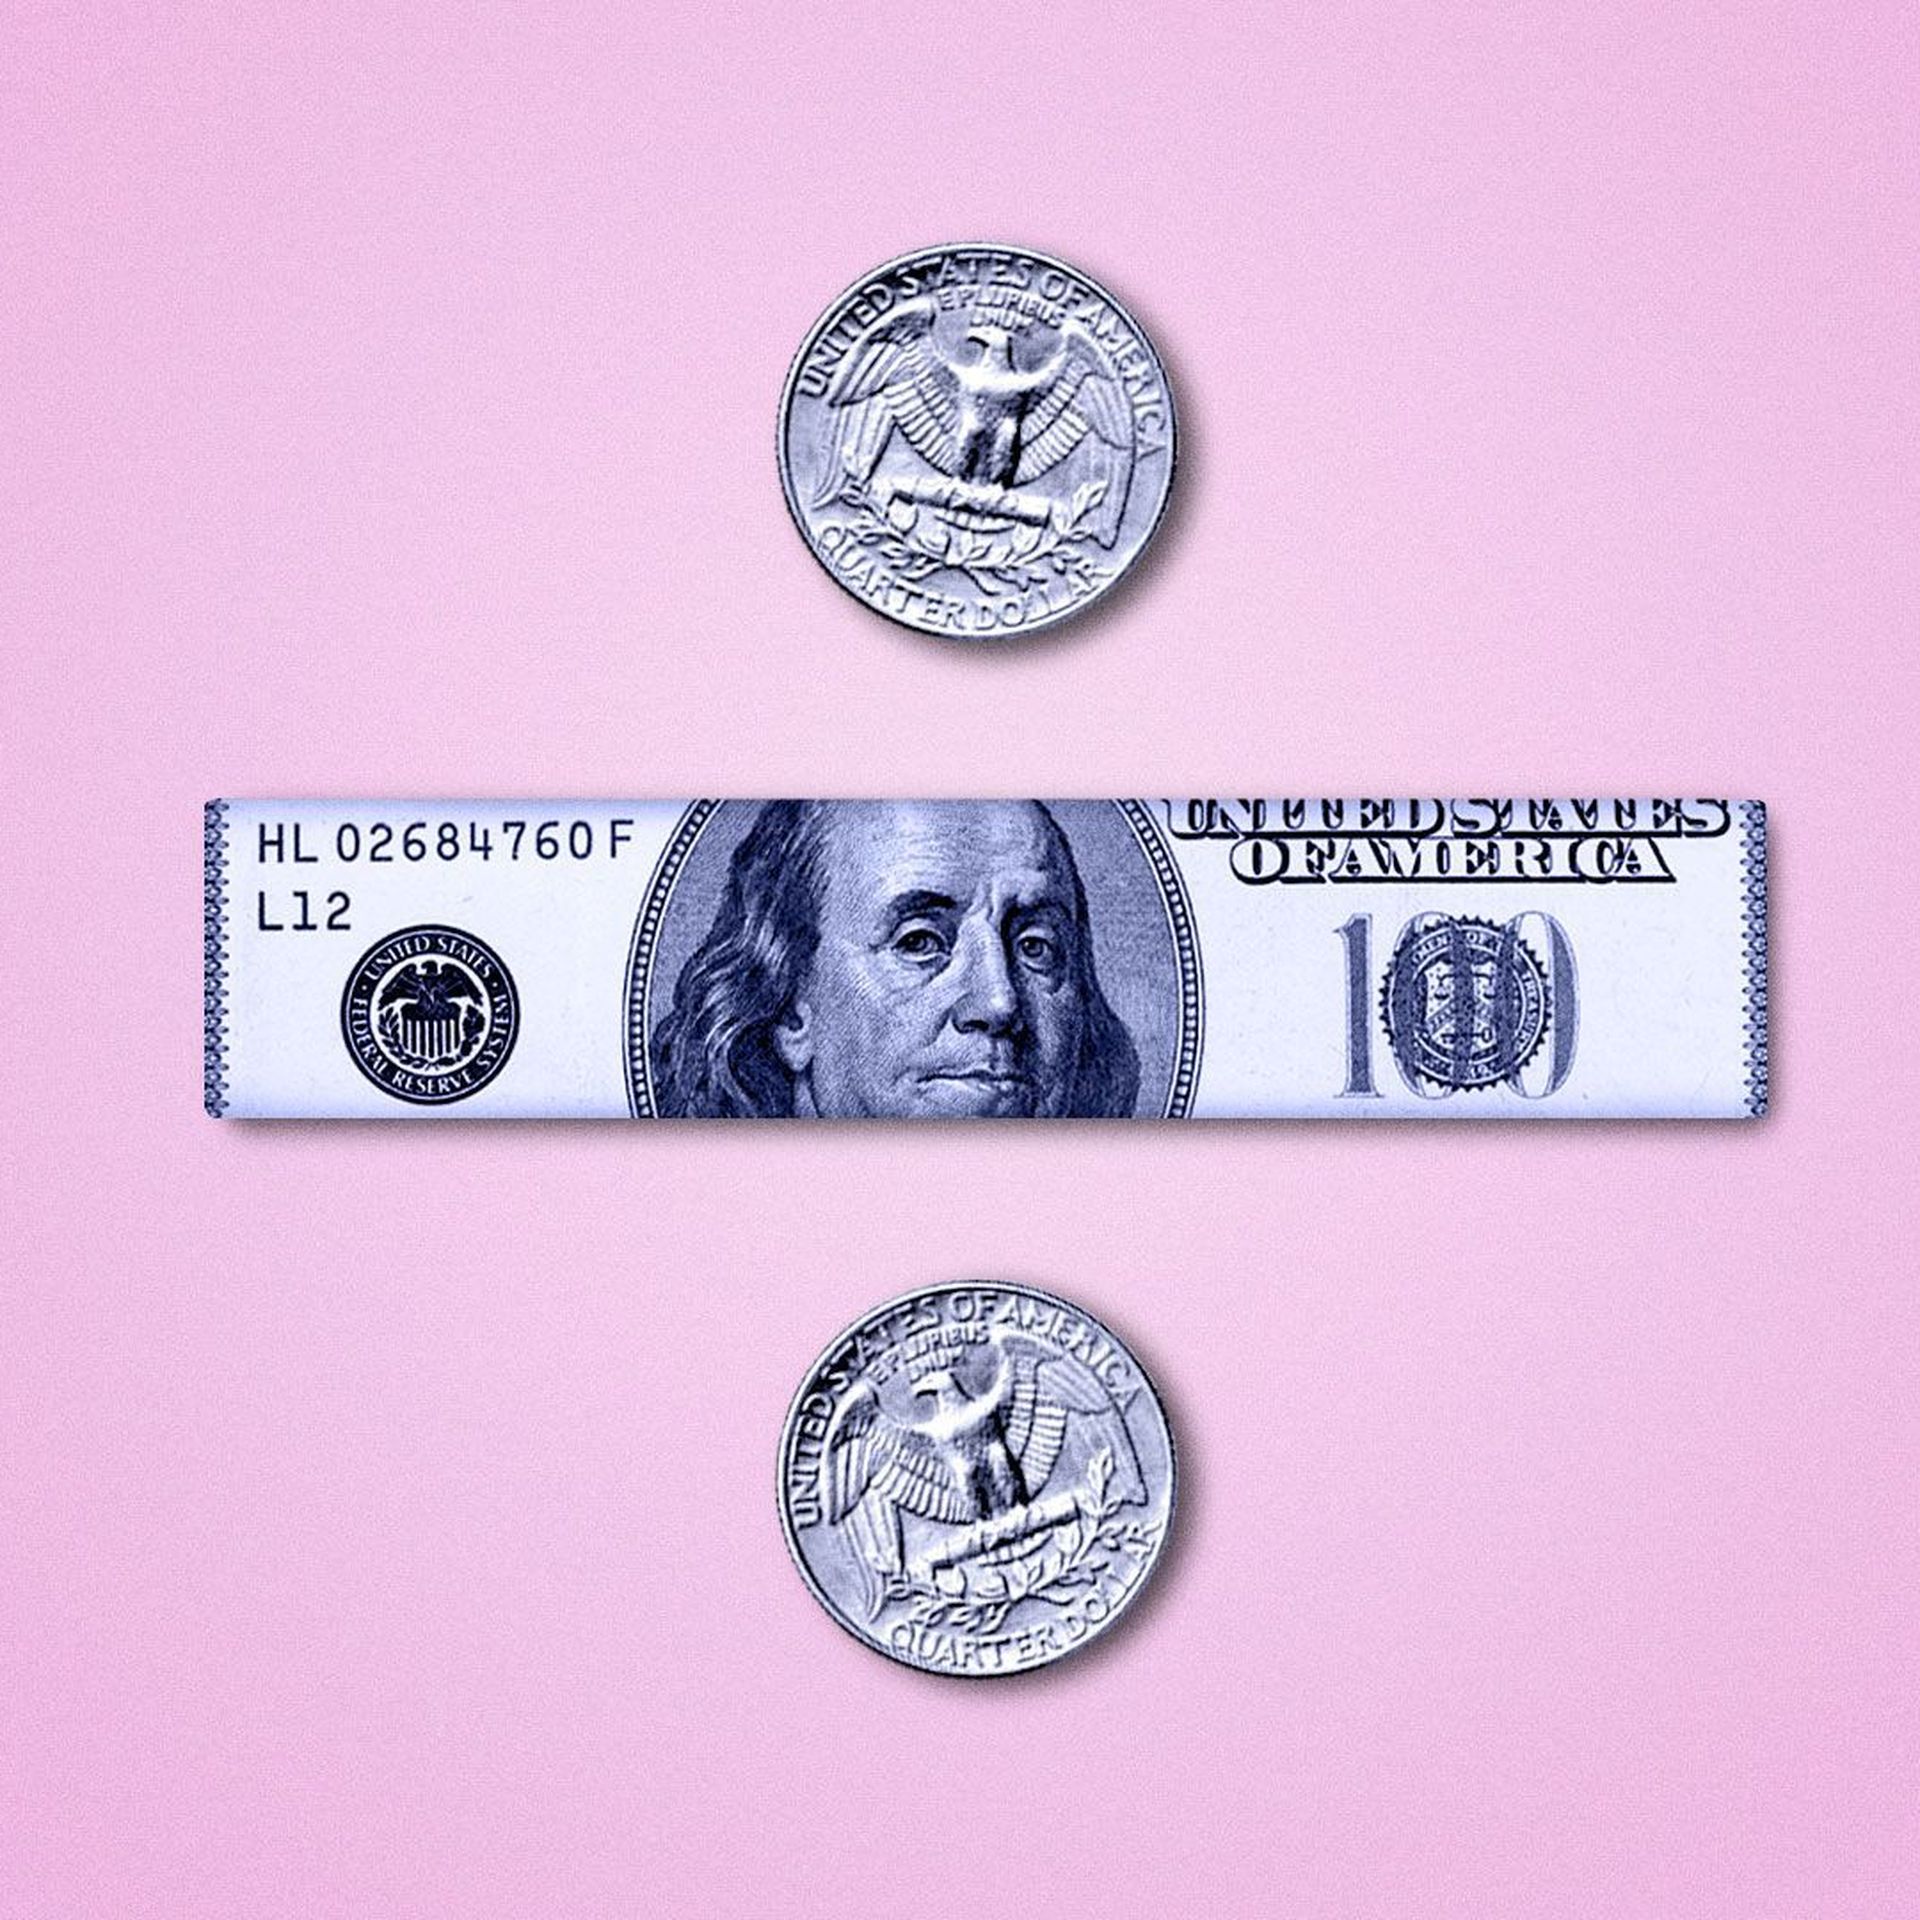 Illustration of money as a division symbol.